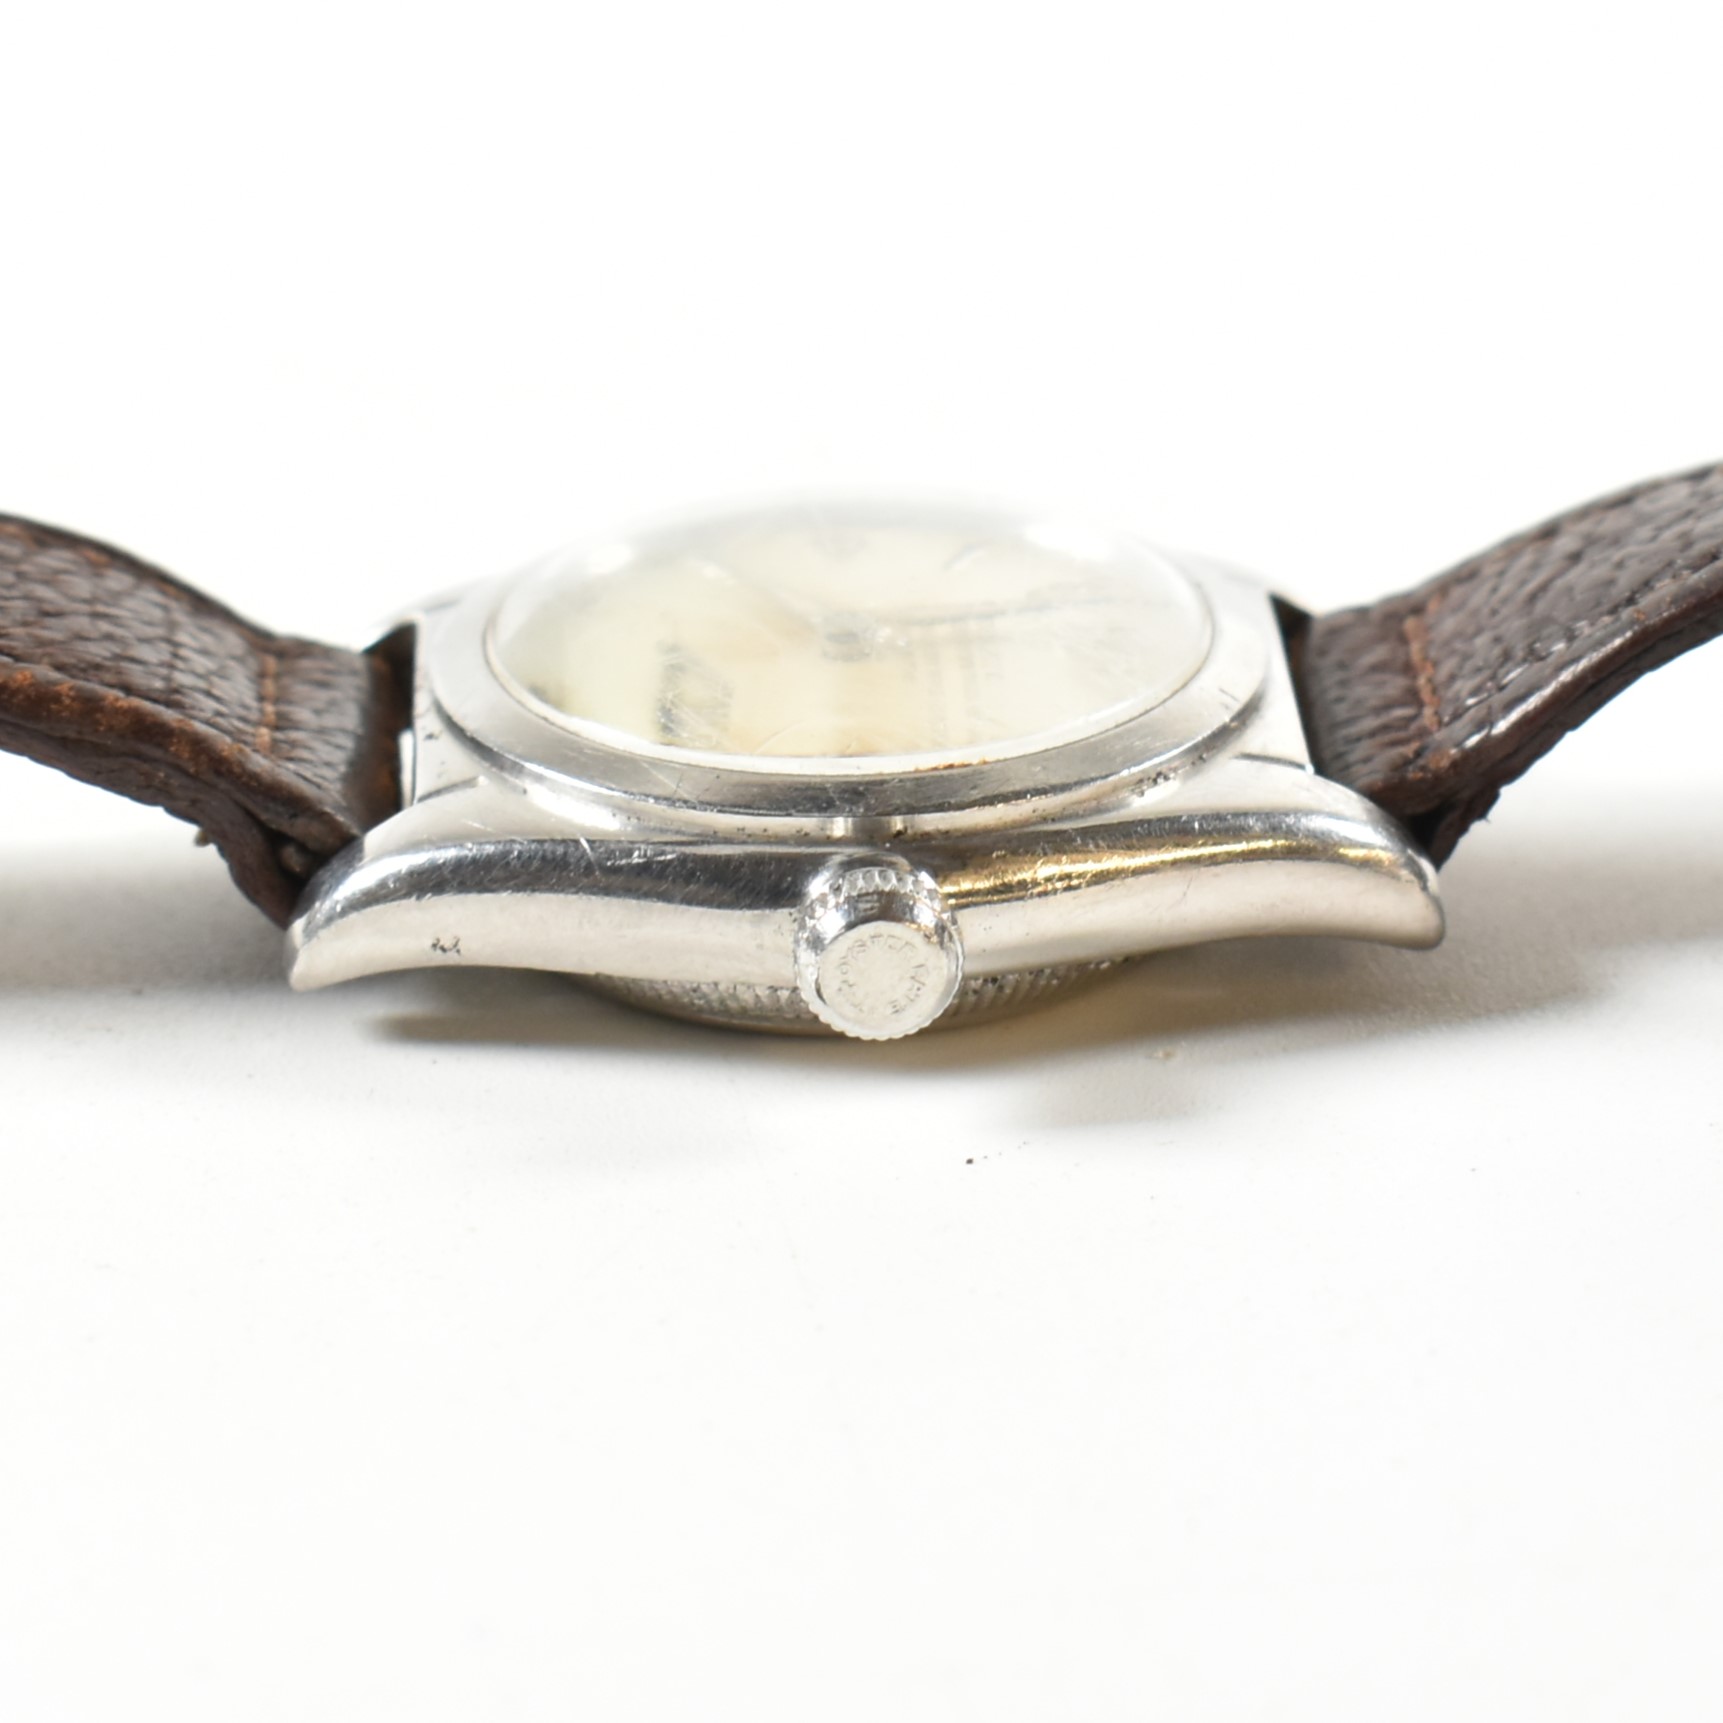 ROLEX OYSTER PERPETUAL WRISTWATCH WITH LEATHER STRAP - Image 6 of 6